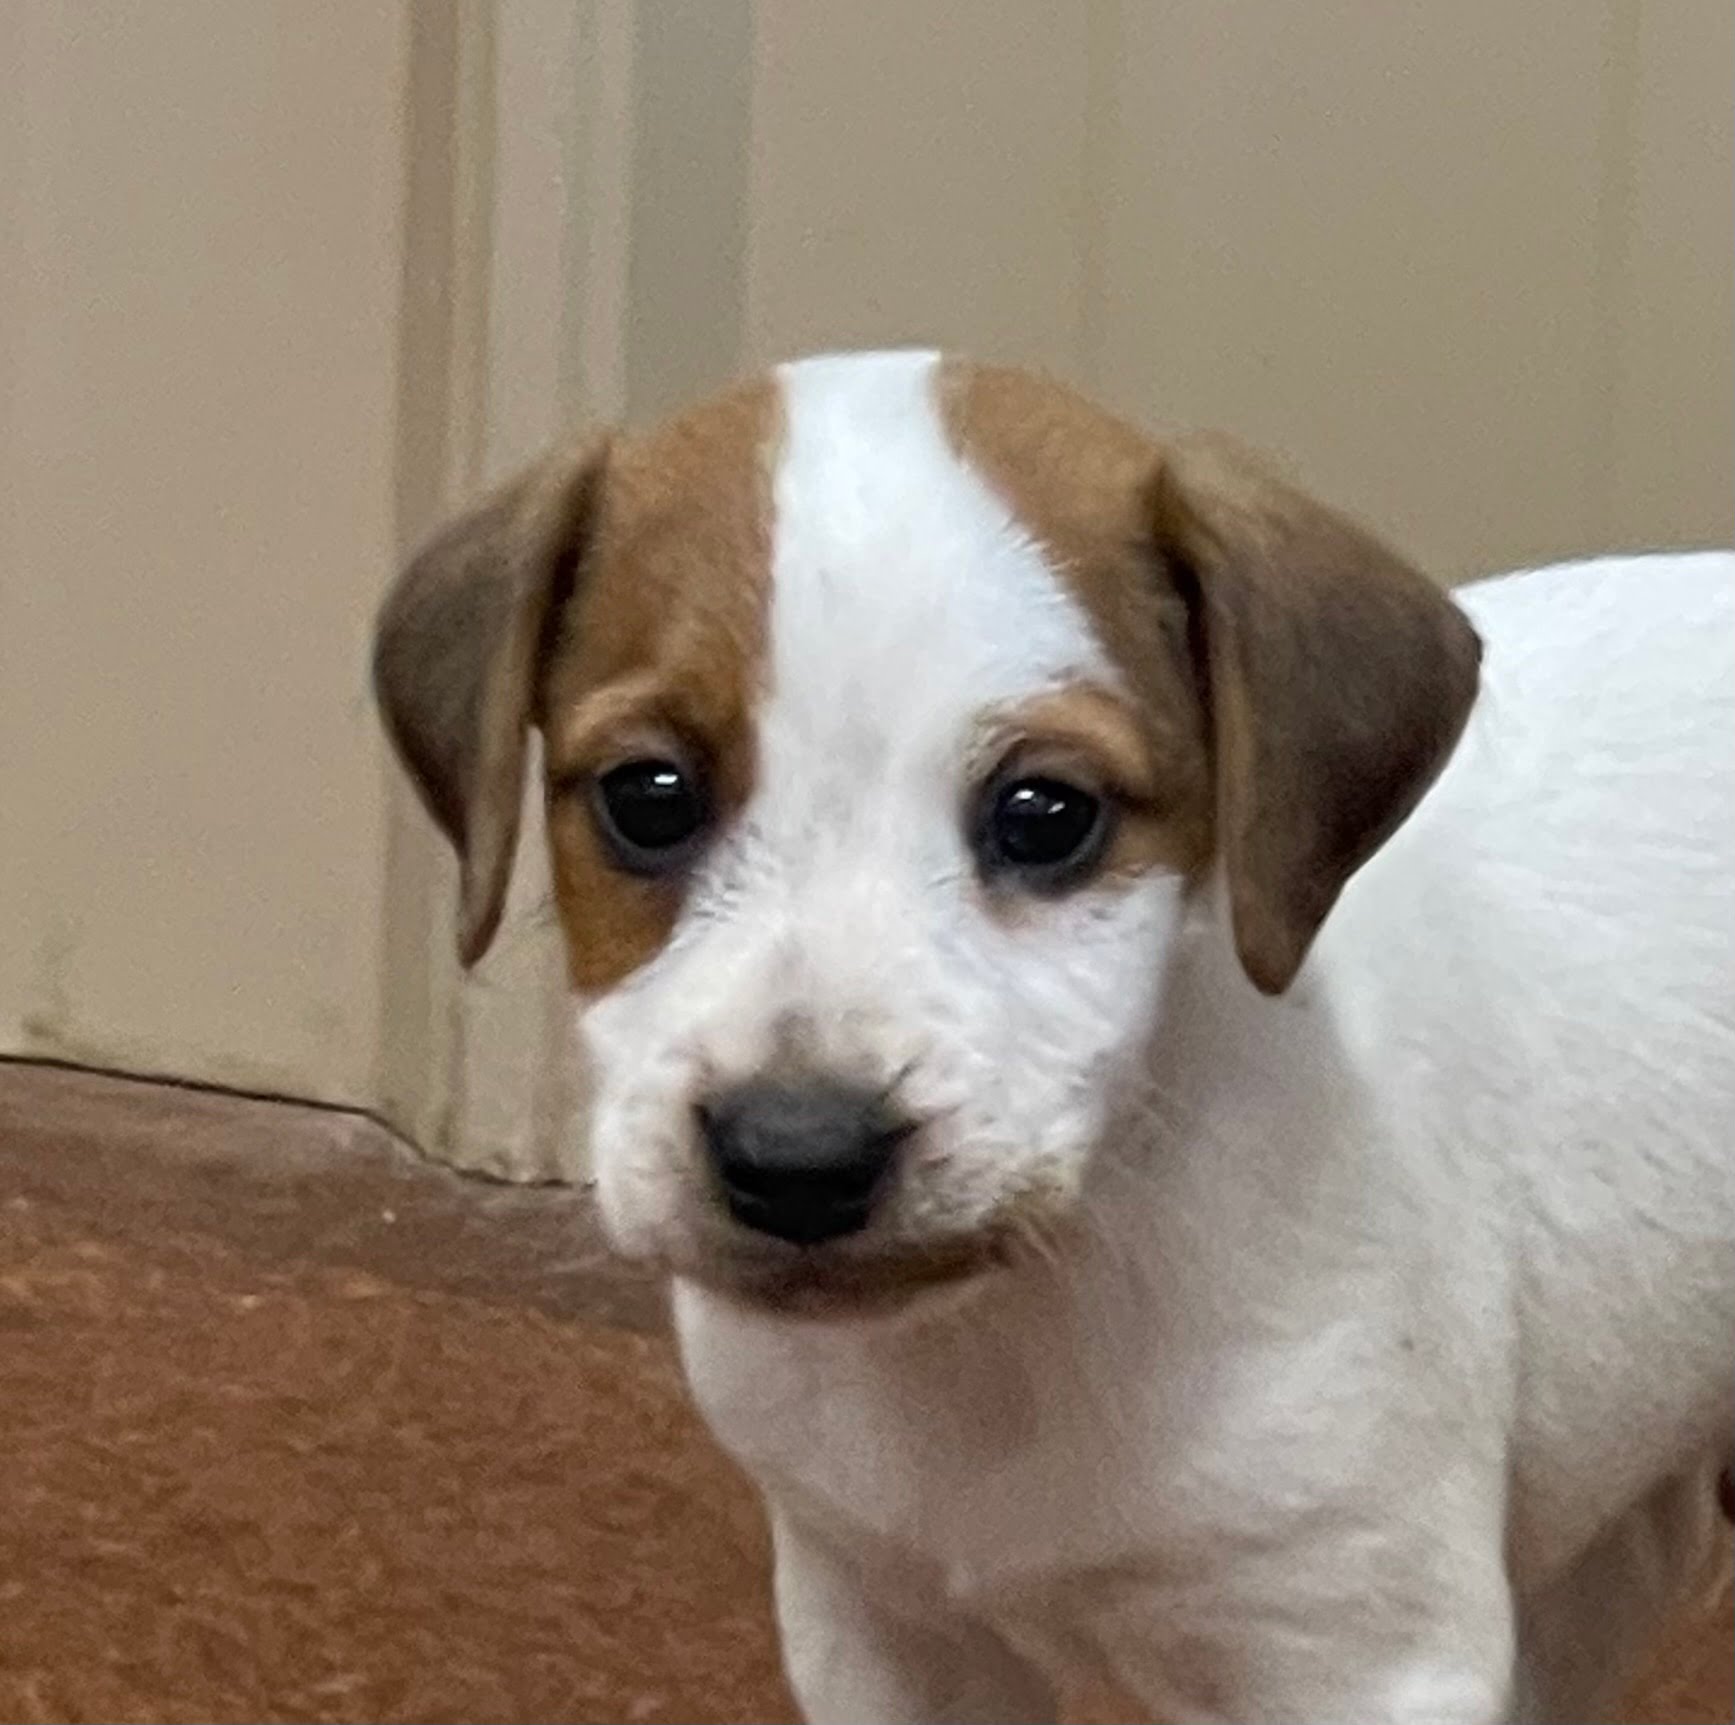 Feather Male 2 – Brown/white Smooth Male Jack Russell Terrier Puppy For Sale